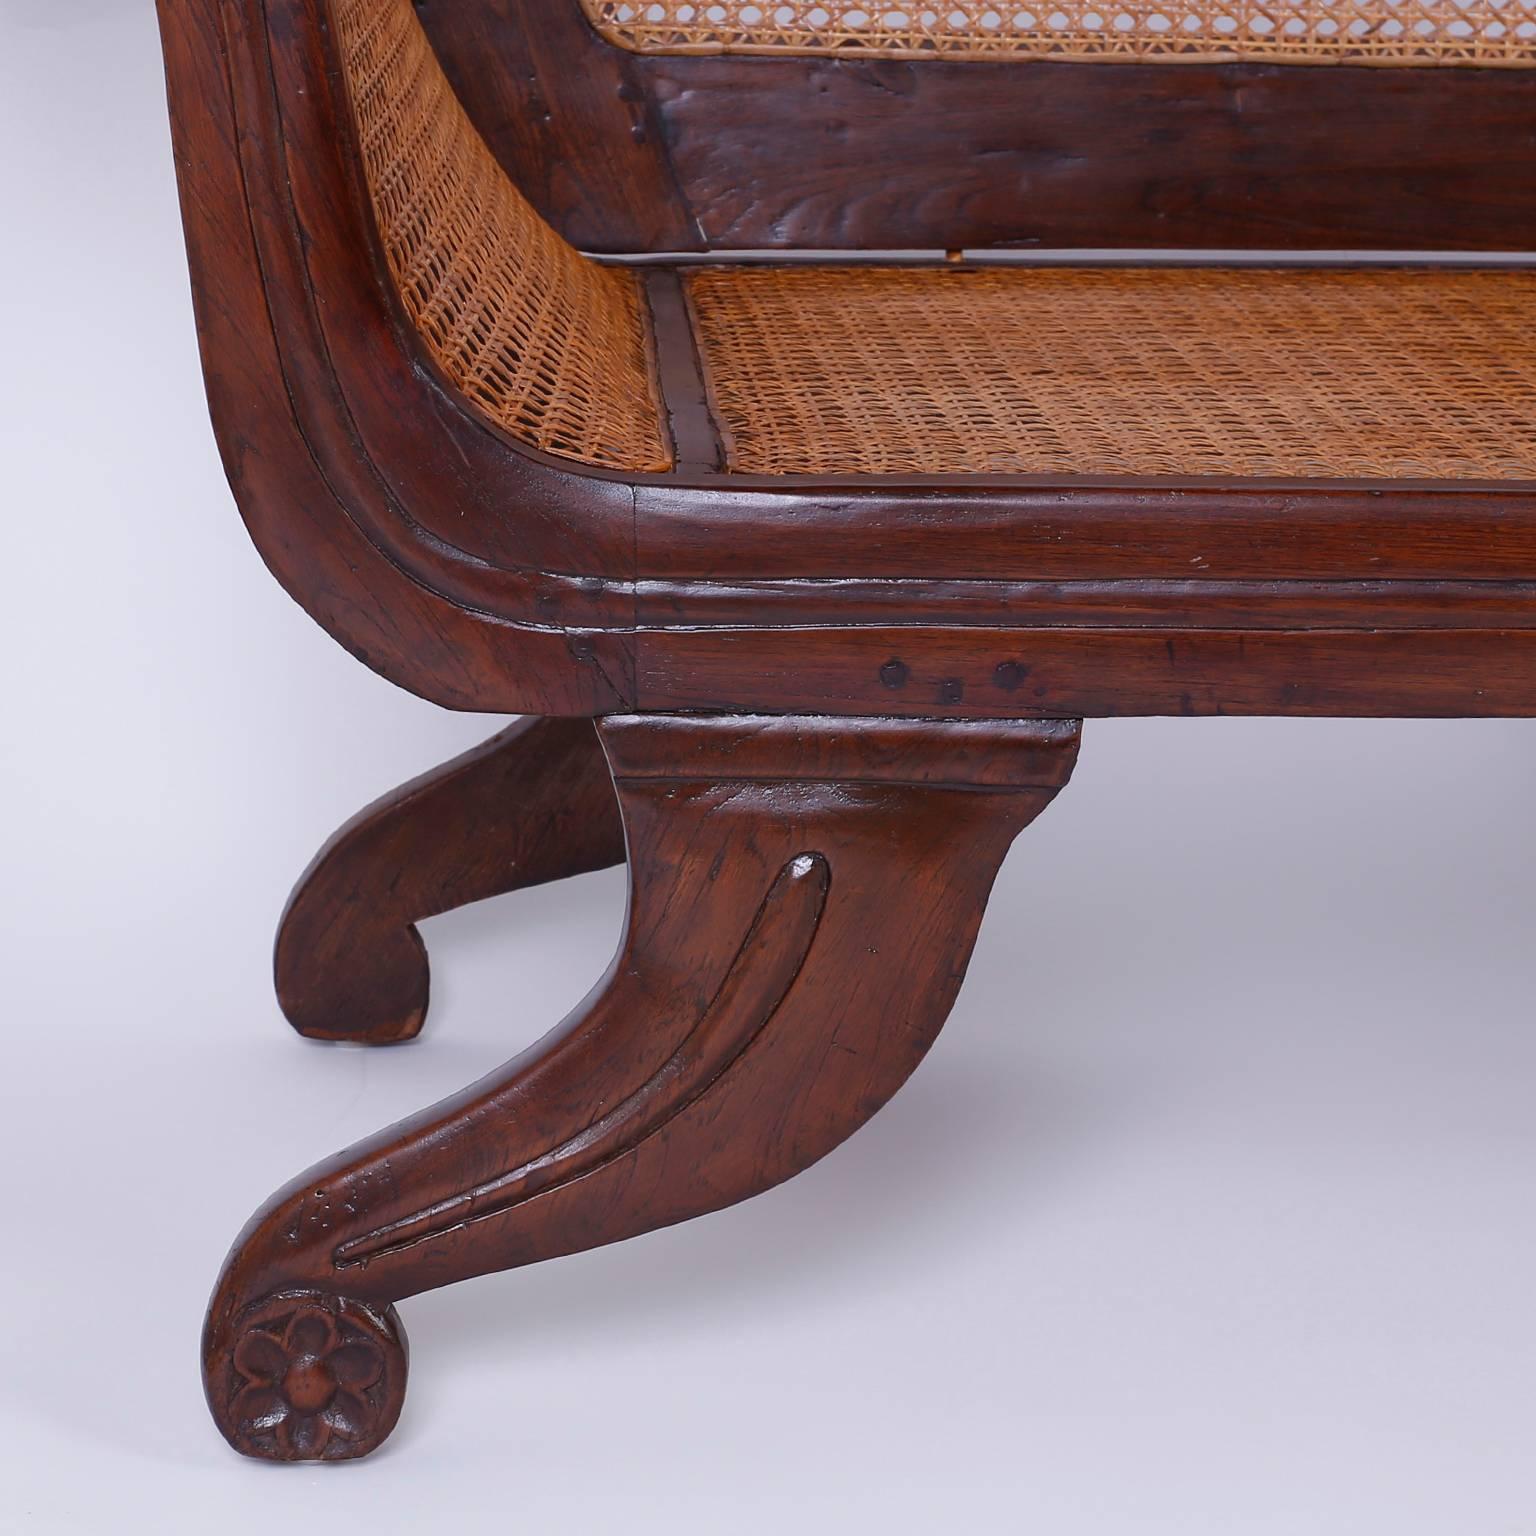 Caribbean Antique British Colonial West Indies Settee